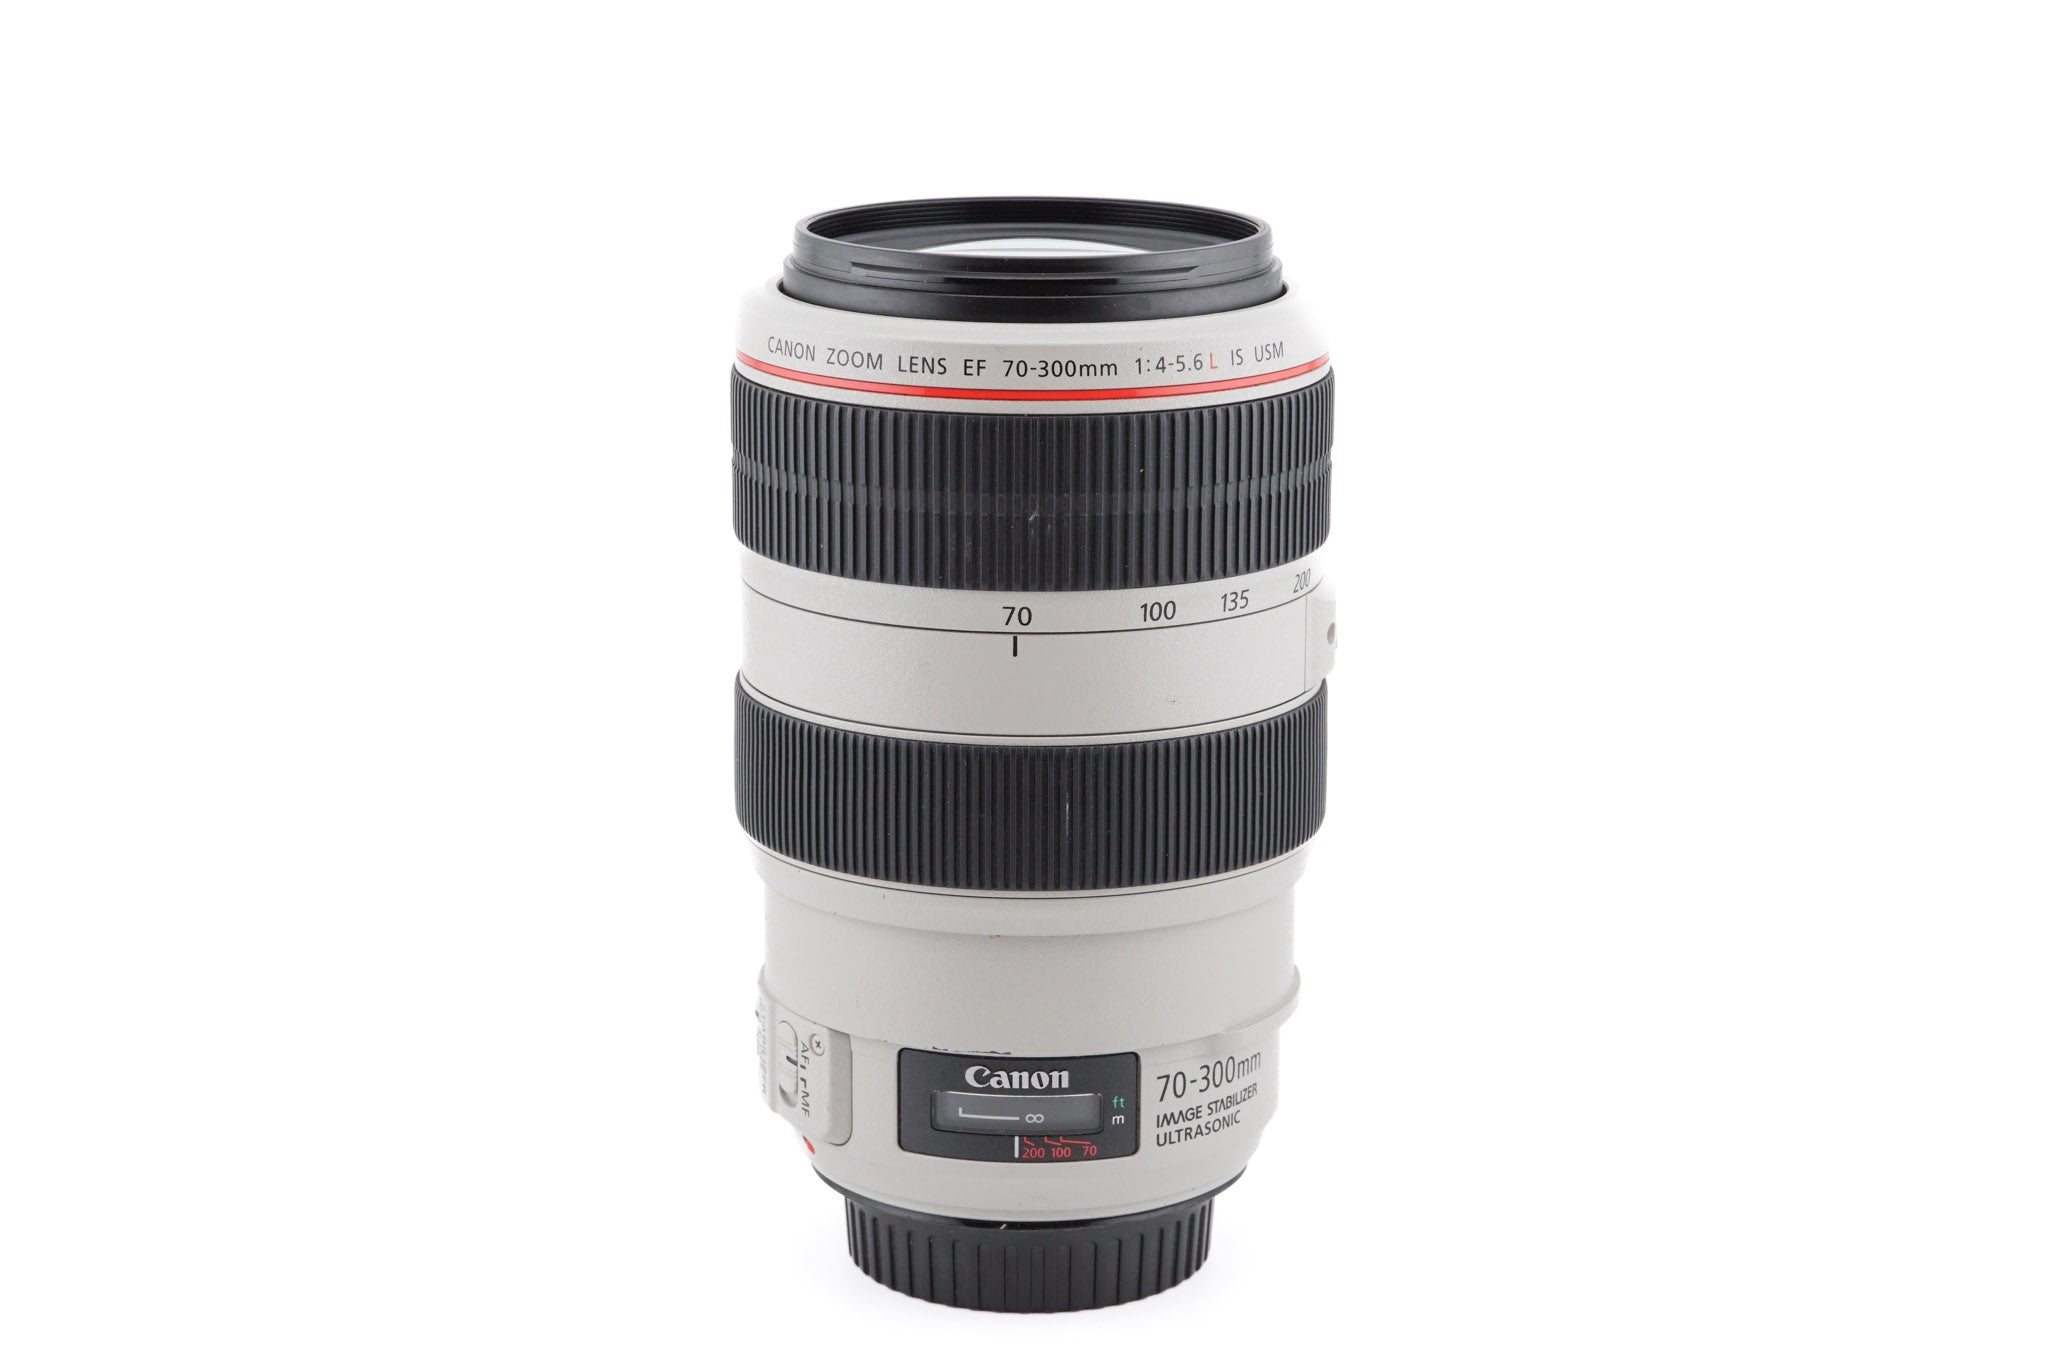 Canon 70-300mm f4-5.6 L IS USM - Lens